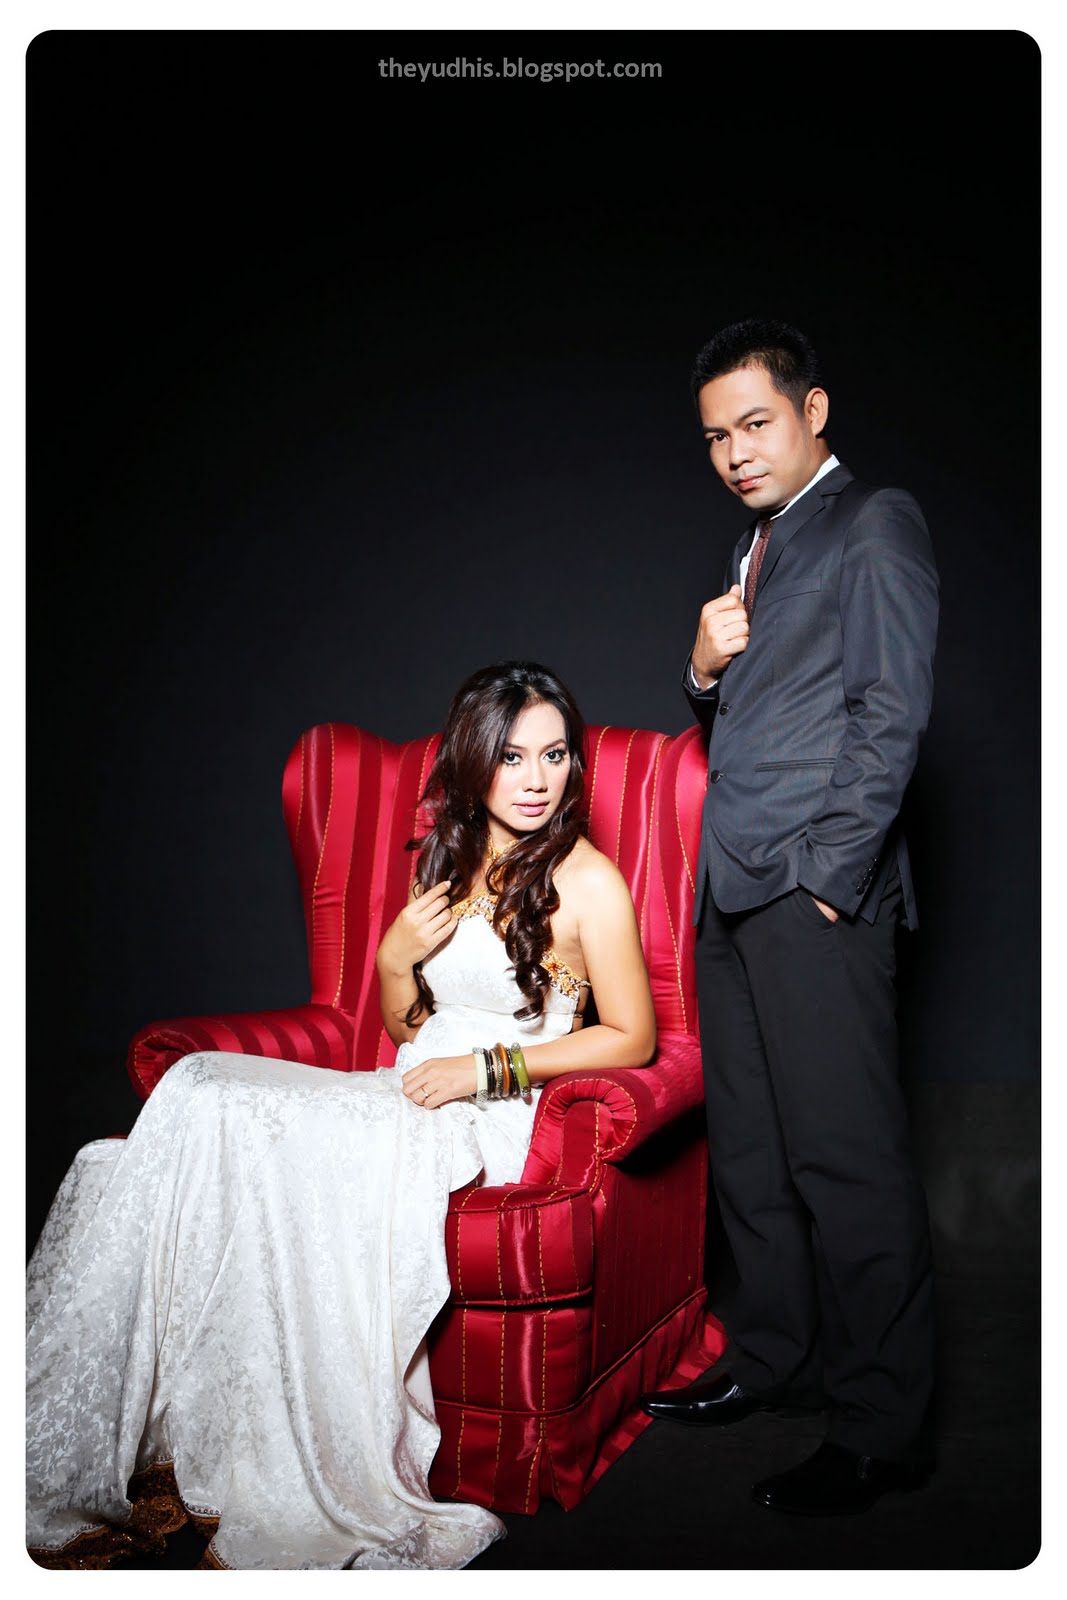 ♥Live your life passionately and sincerenly♥: Pre-Wedding ...